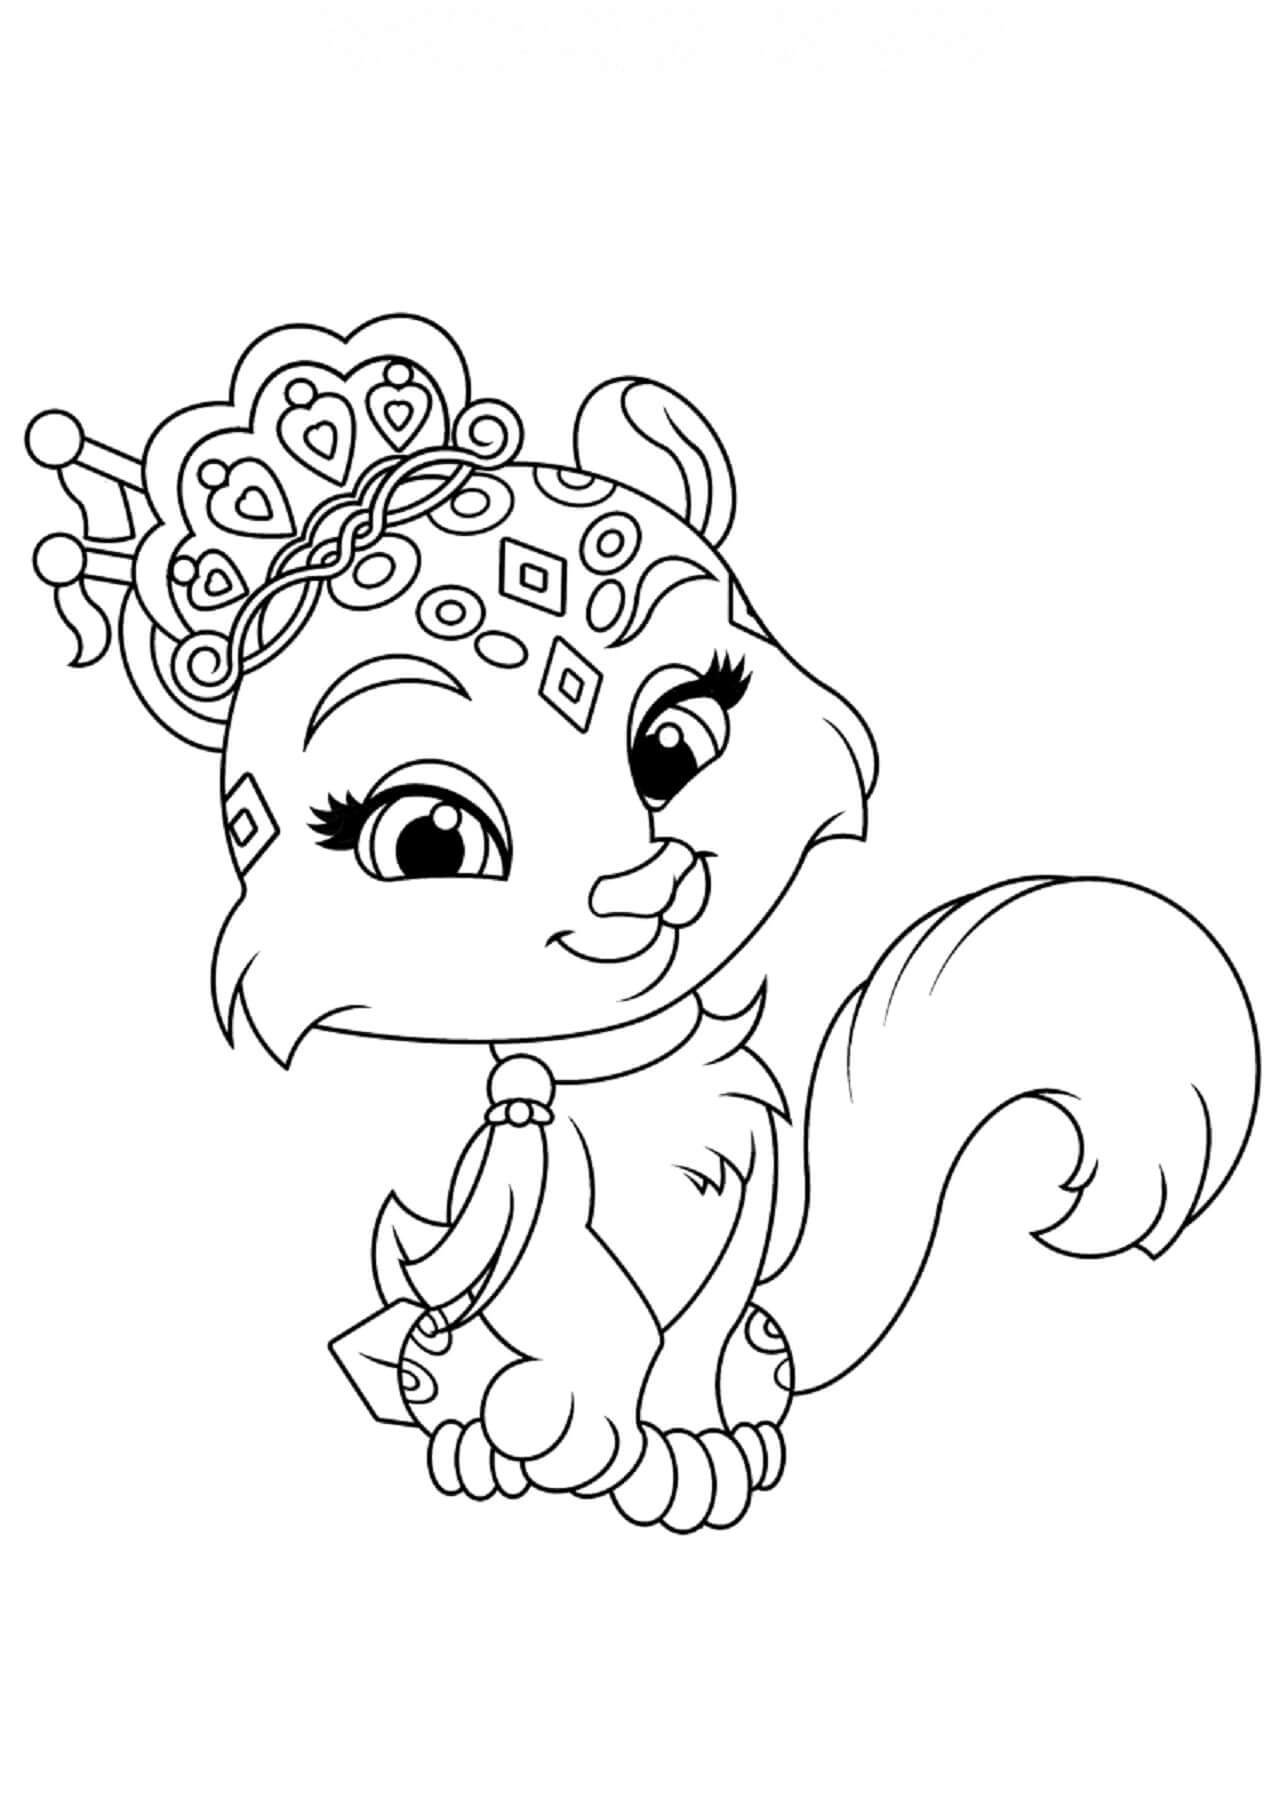 Palace Pets Snowpaws coloring page - Download, Print or Color Online ...